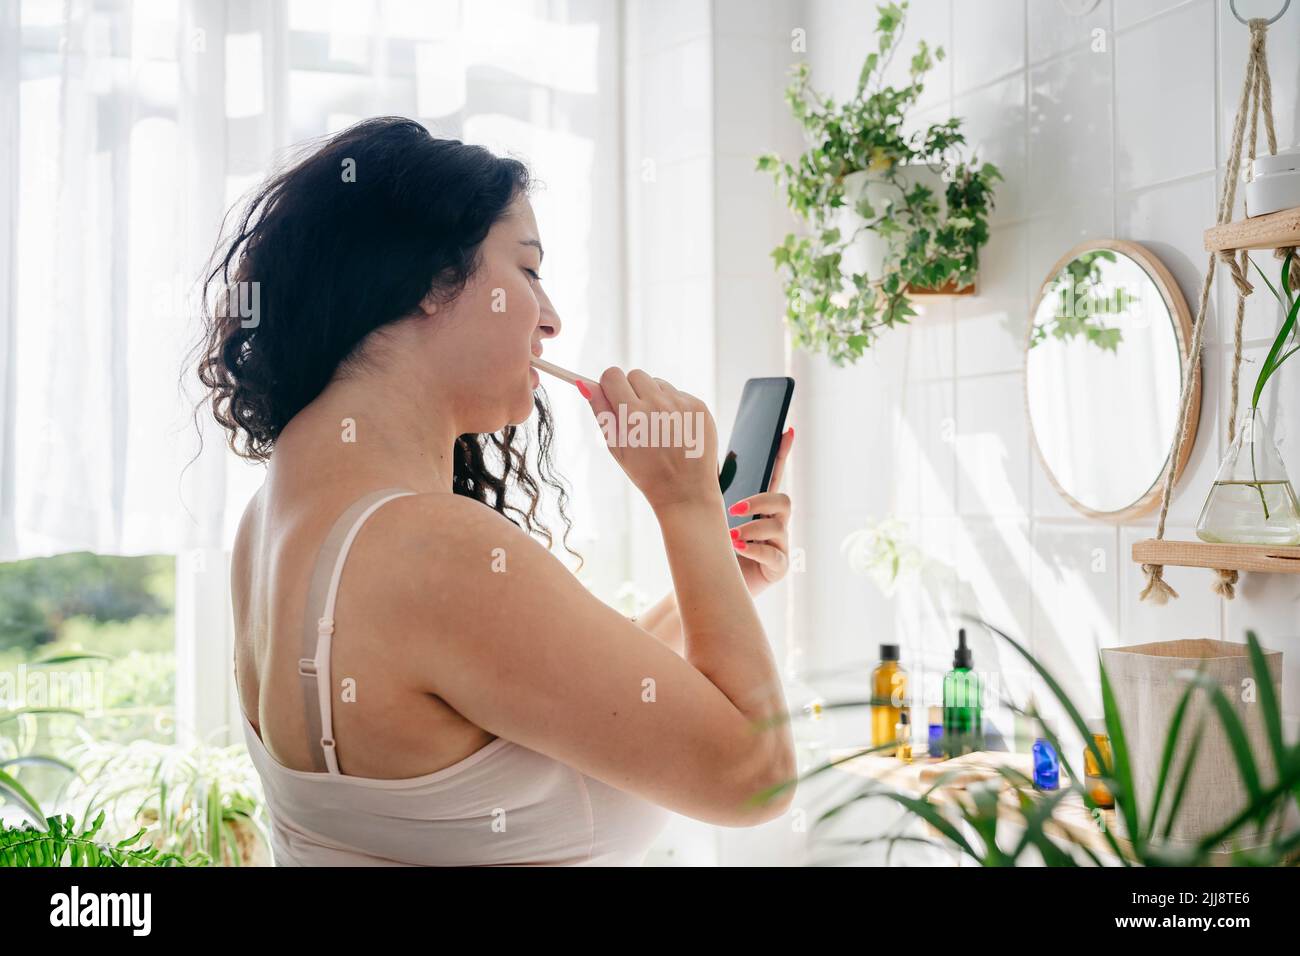 Young beautiful woman with overweight brushing her teeth and looking at the phone in light batroom with many green plants. Wellness, everyday technology Stock Photo